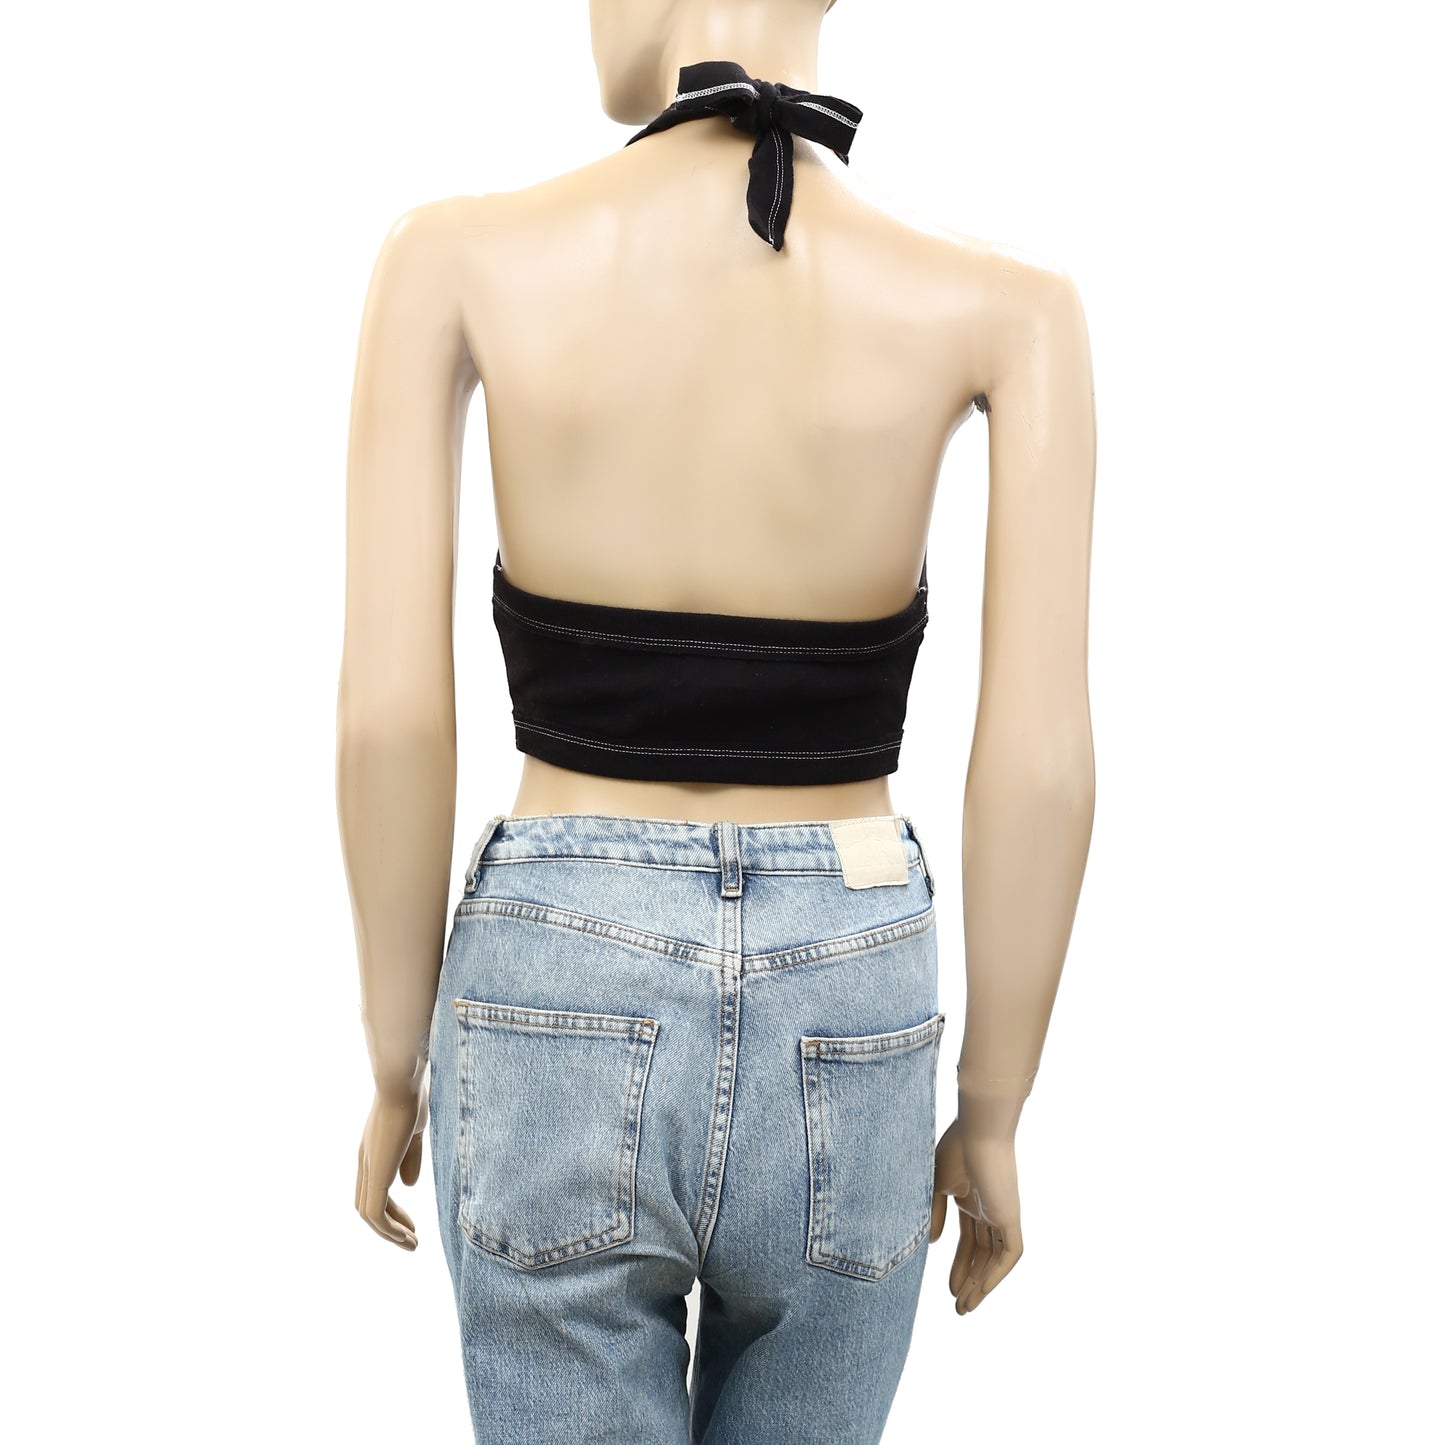 BDG Urban Outfitters Dazi Halter Cropped Top